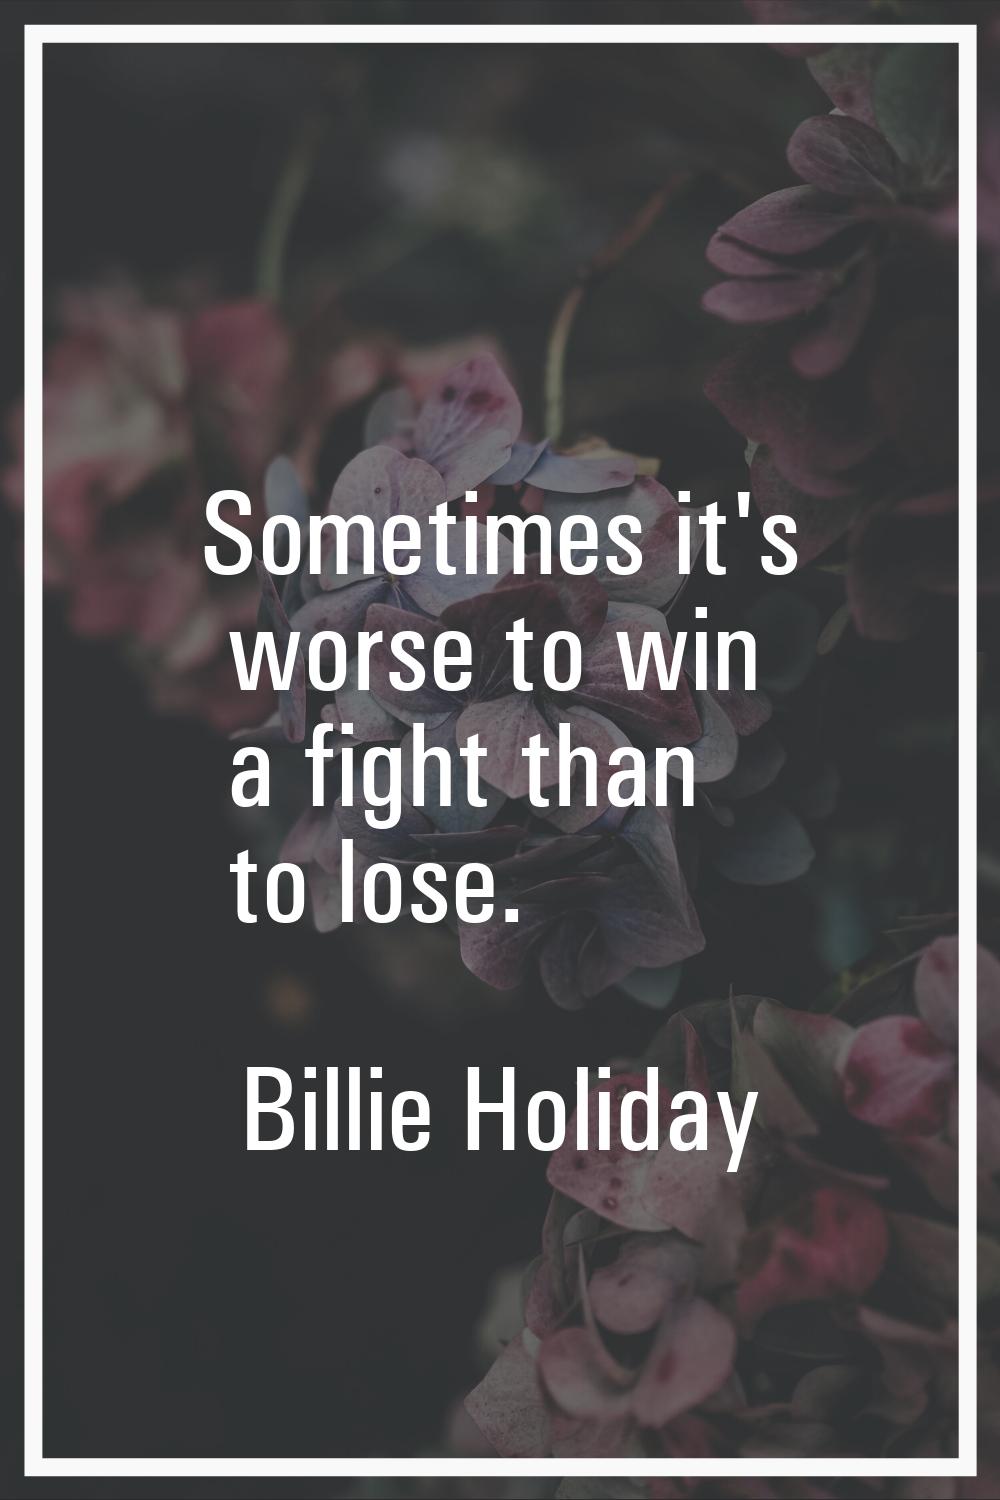 Sometimes it's worse to win a fight than to lose.